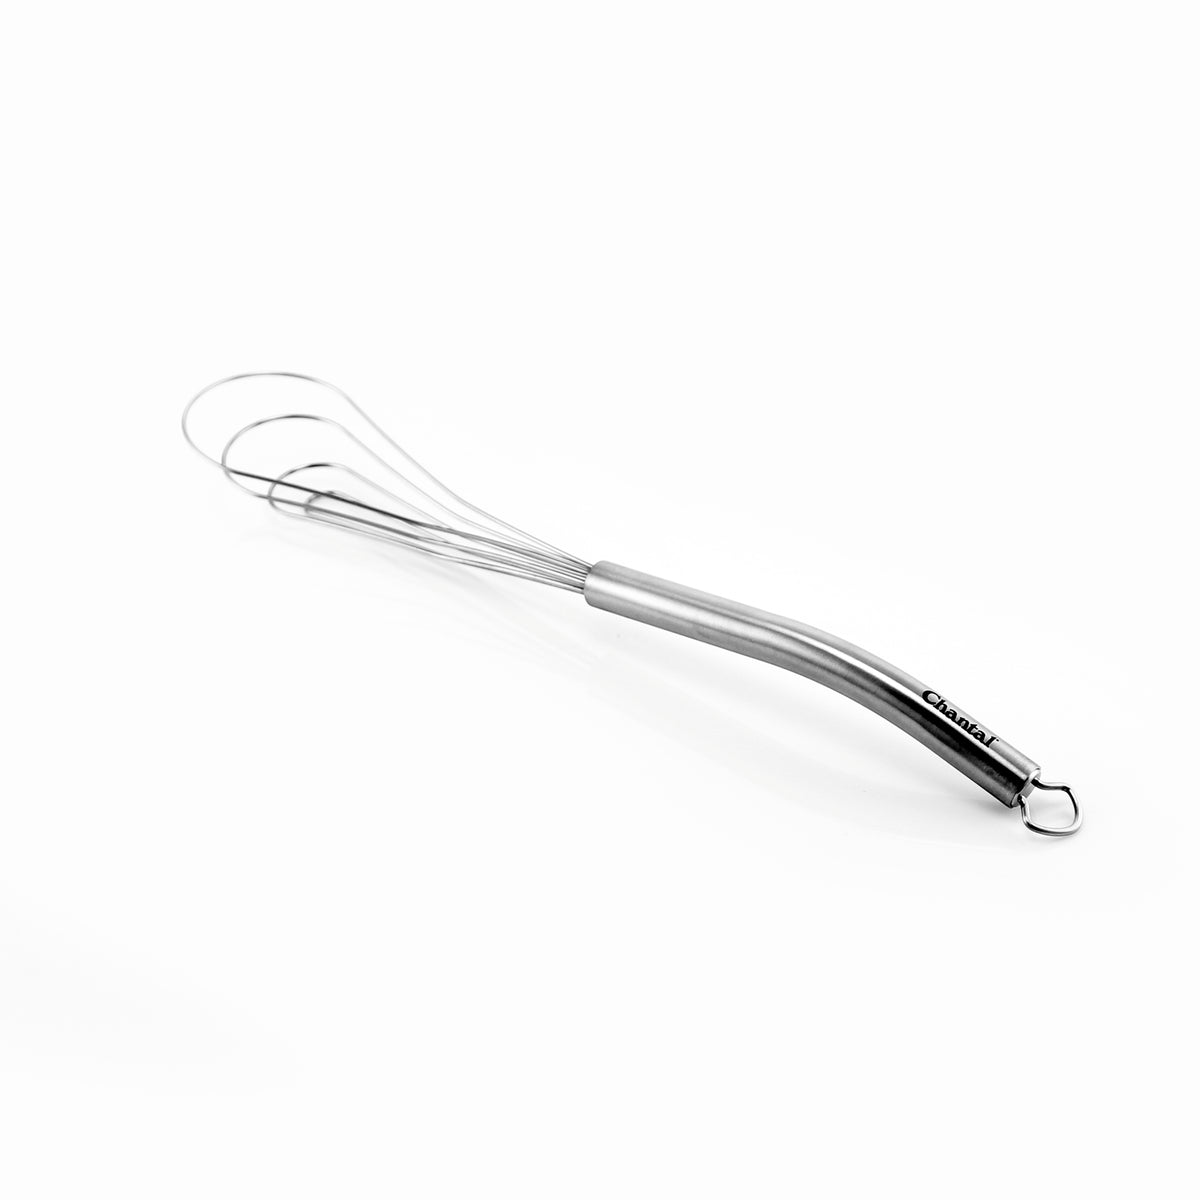 Tiny Whisk or Flat Whisk? – The Cutlery Review